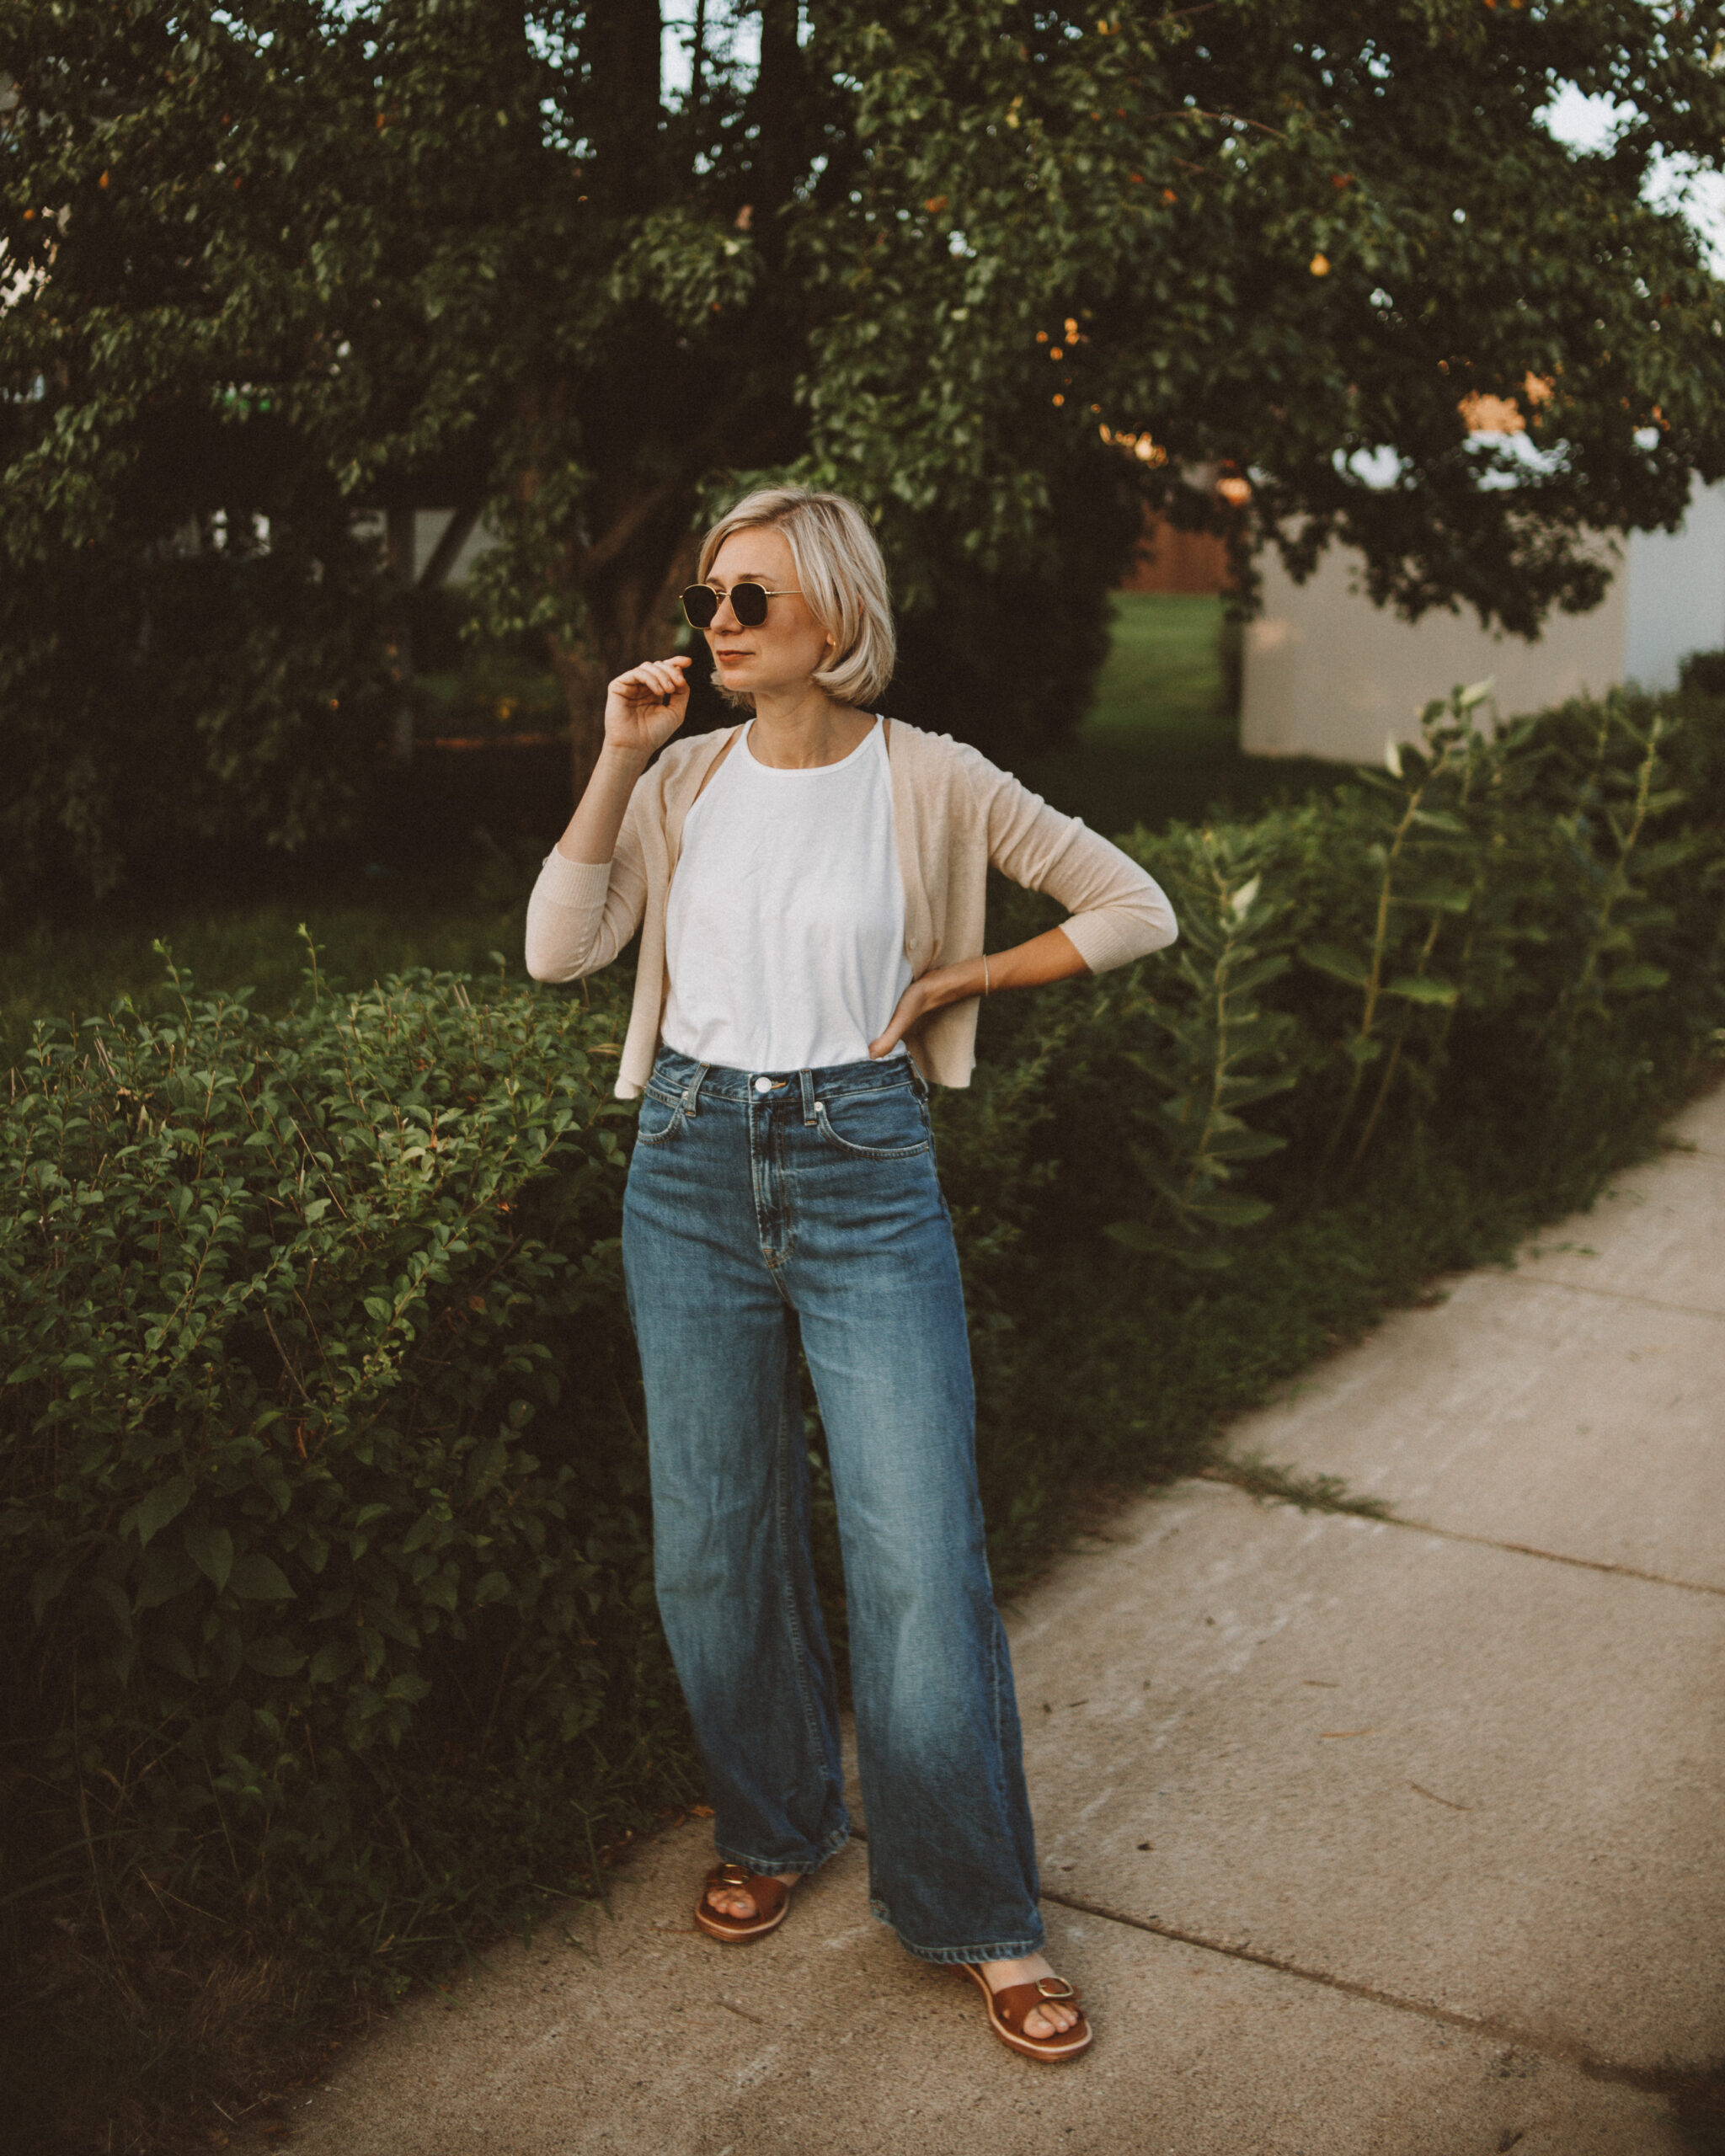 Karin Emily wears a 90s inspired outfit from Everlane with a white tank top, cropped cardigan, and dark wash wide leg jeans